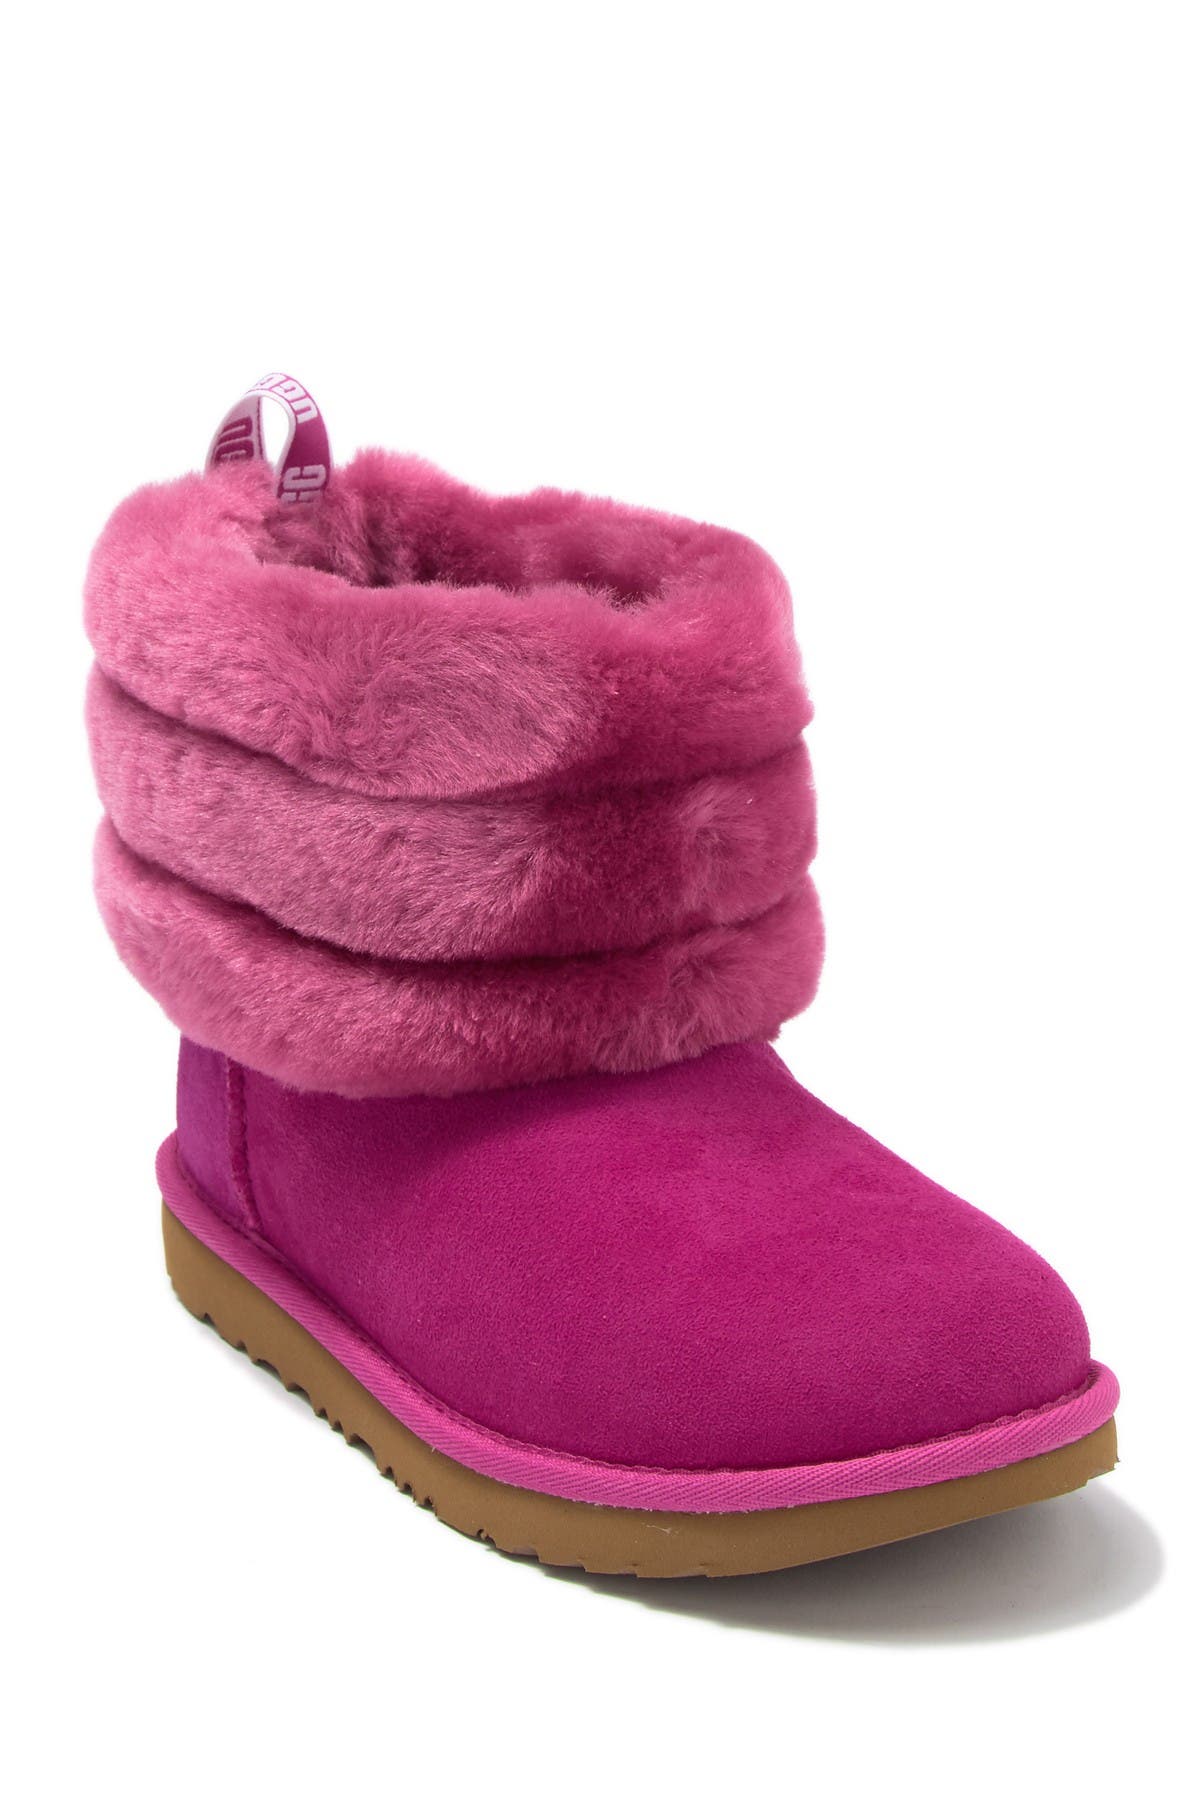 pink ugg fluff mini quilted